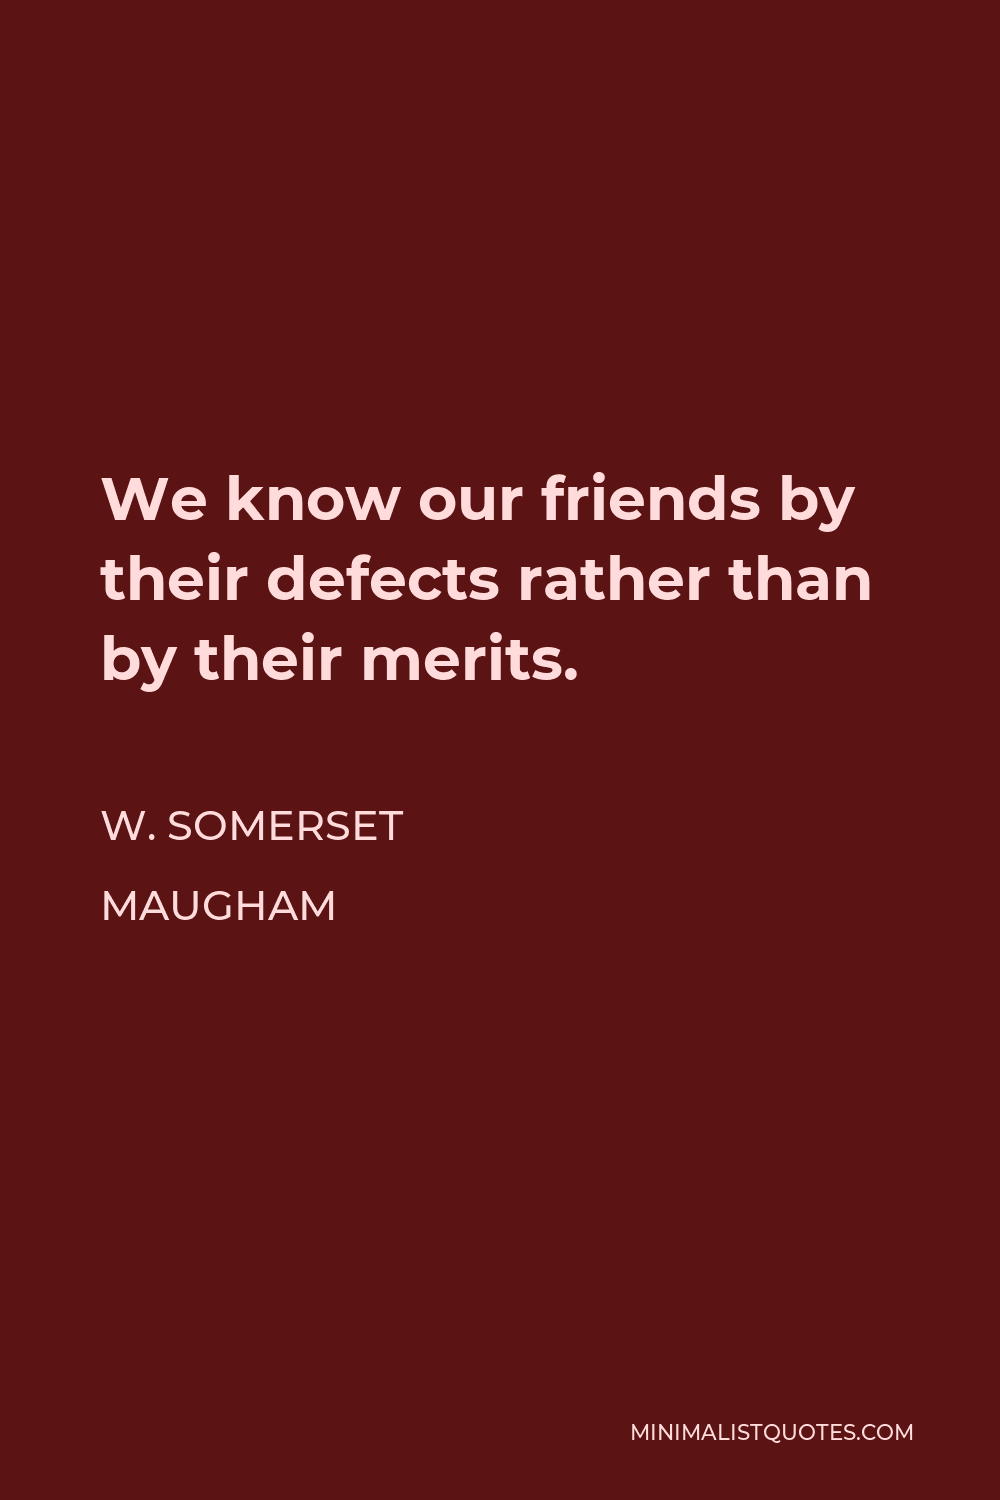 W. Somerset Maugham Quote - We know our friends by their defects rather than by their merits.